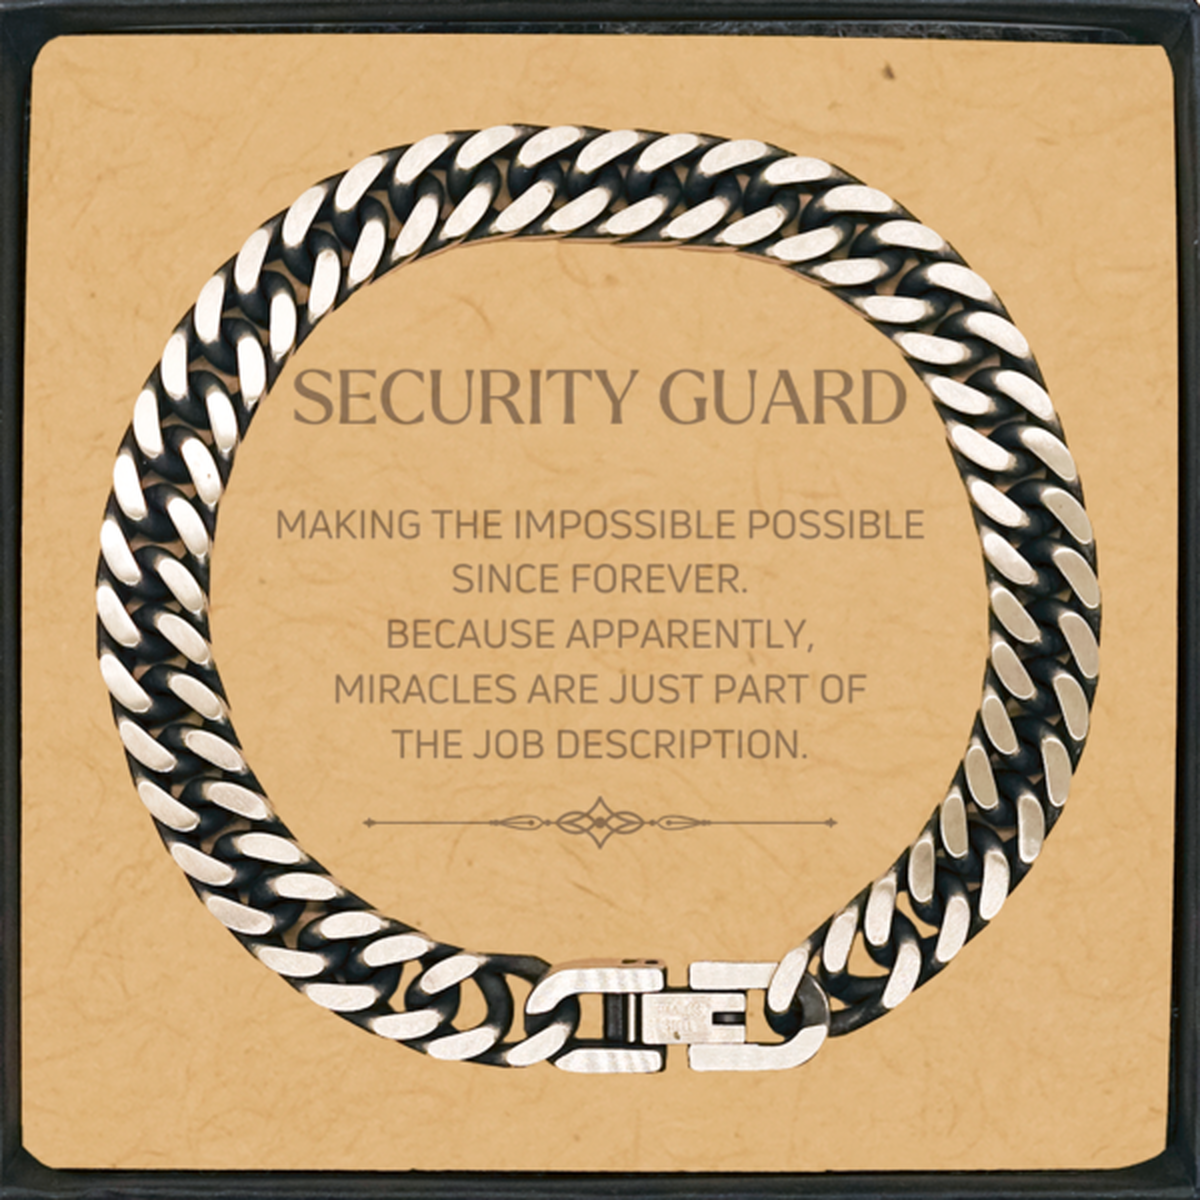 Funny Security Guard Gifts, Miracles are just part of the job description, Inspirational Birthday Cuban Link Chain Bracelet For Security Guard, Men, Women, Coworkers, Friends, Boss